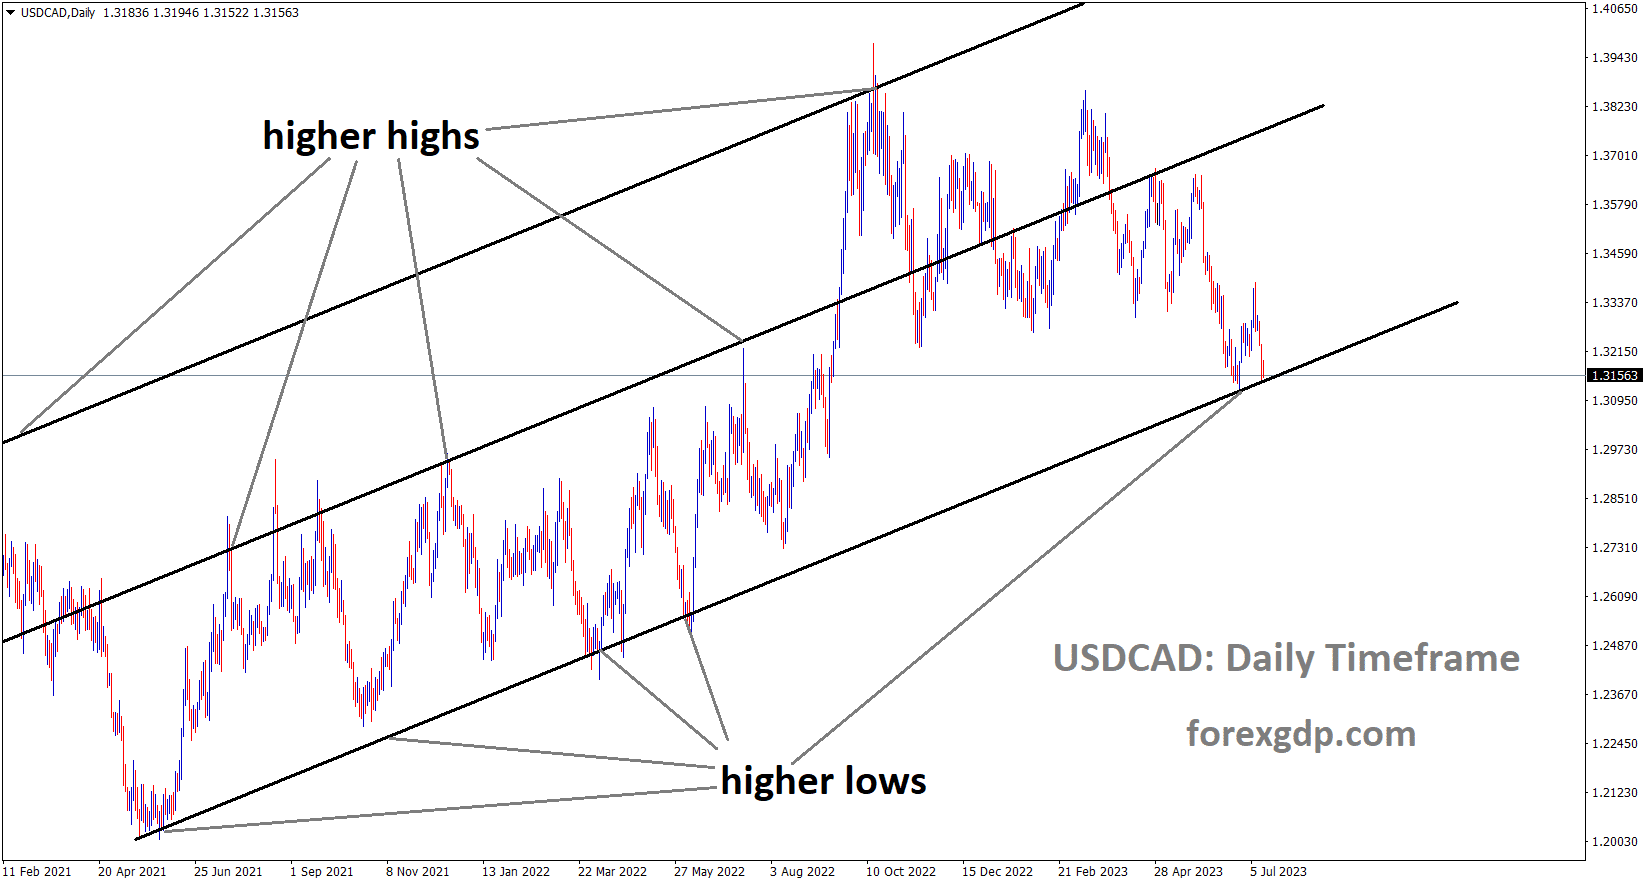 USDCAD is moving in an Ascending channel and the market has reached the higher low area of the channel 1